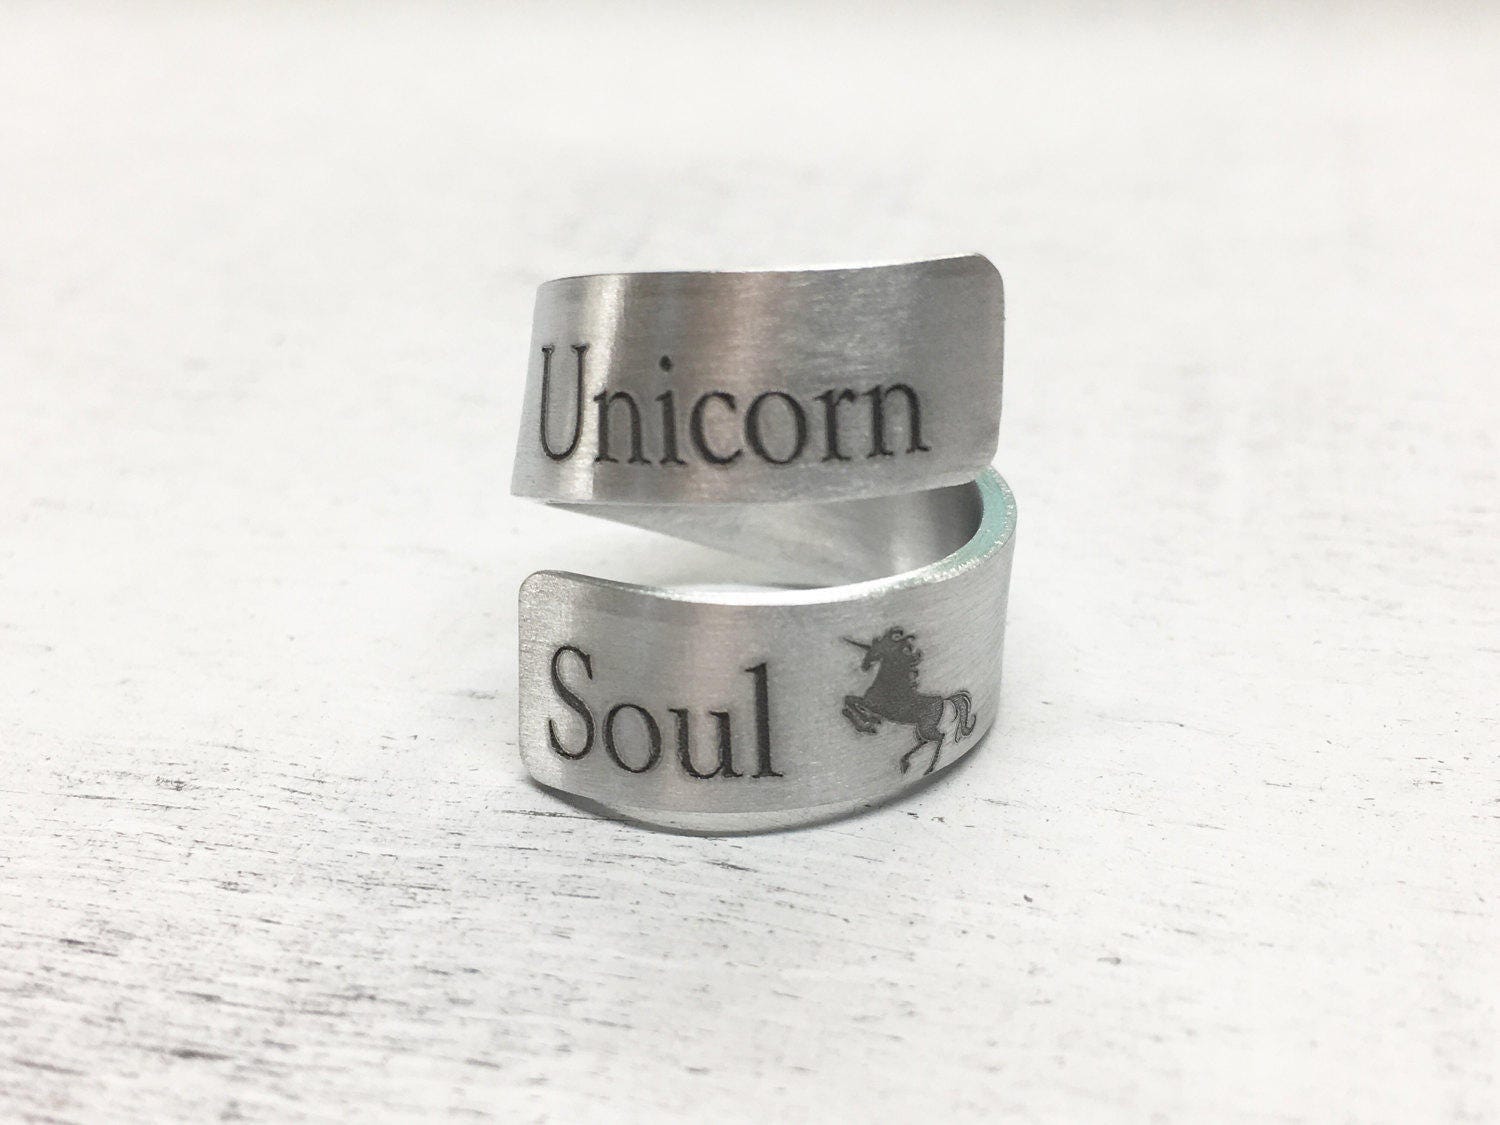 Unicorn Soul Wrap Ring | Personalized Ring | Gift for Her | Unique Gift | Hand Stamped Ring | Inspiration Ring | Hand Stamped Ring